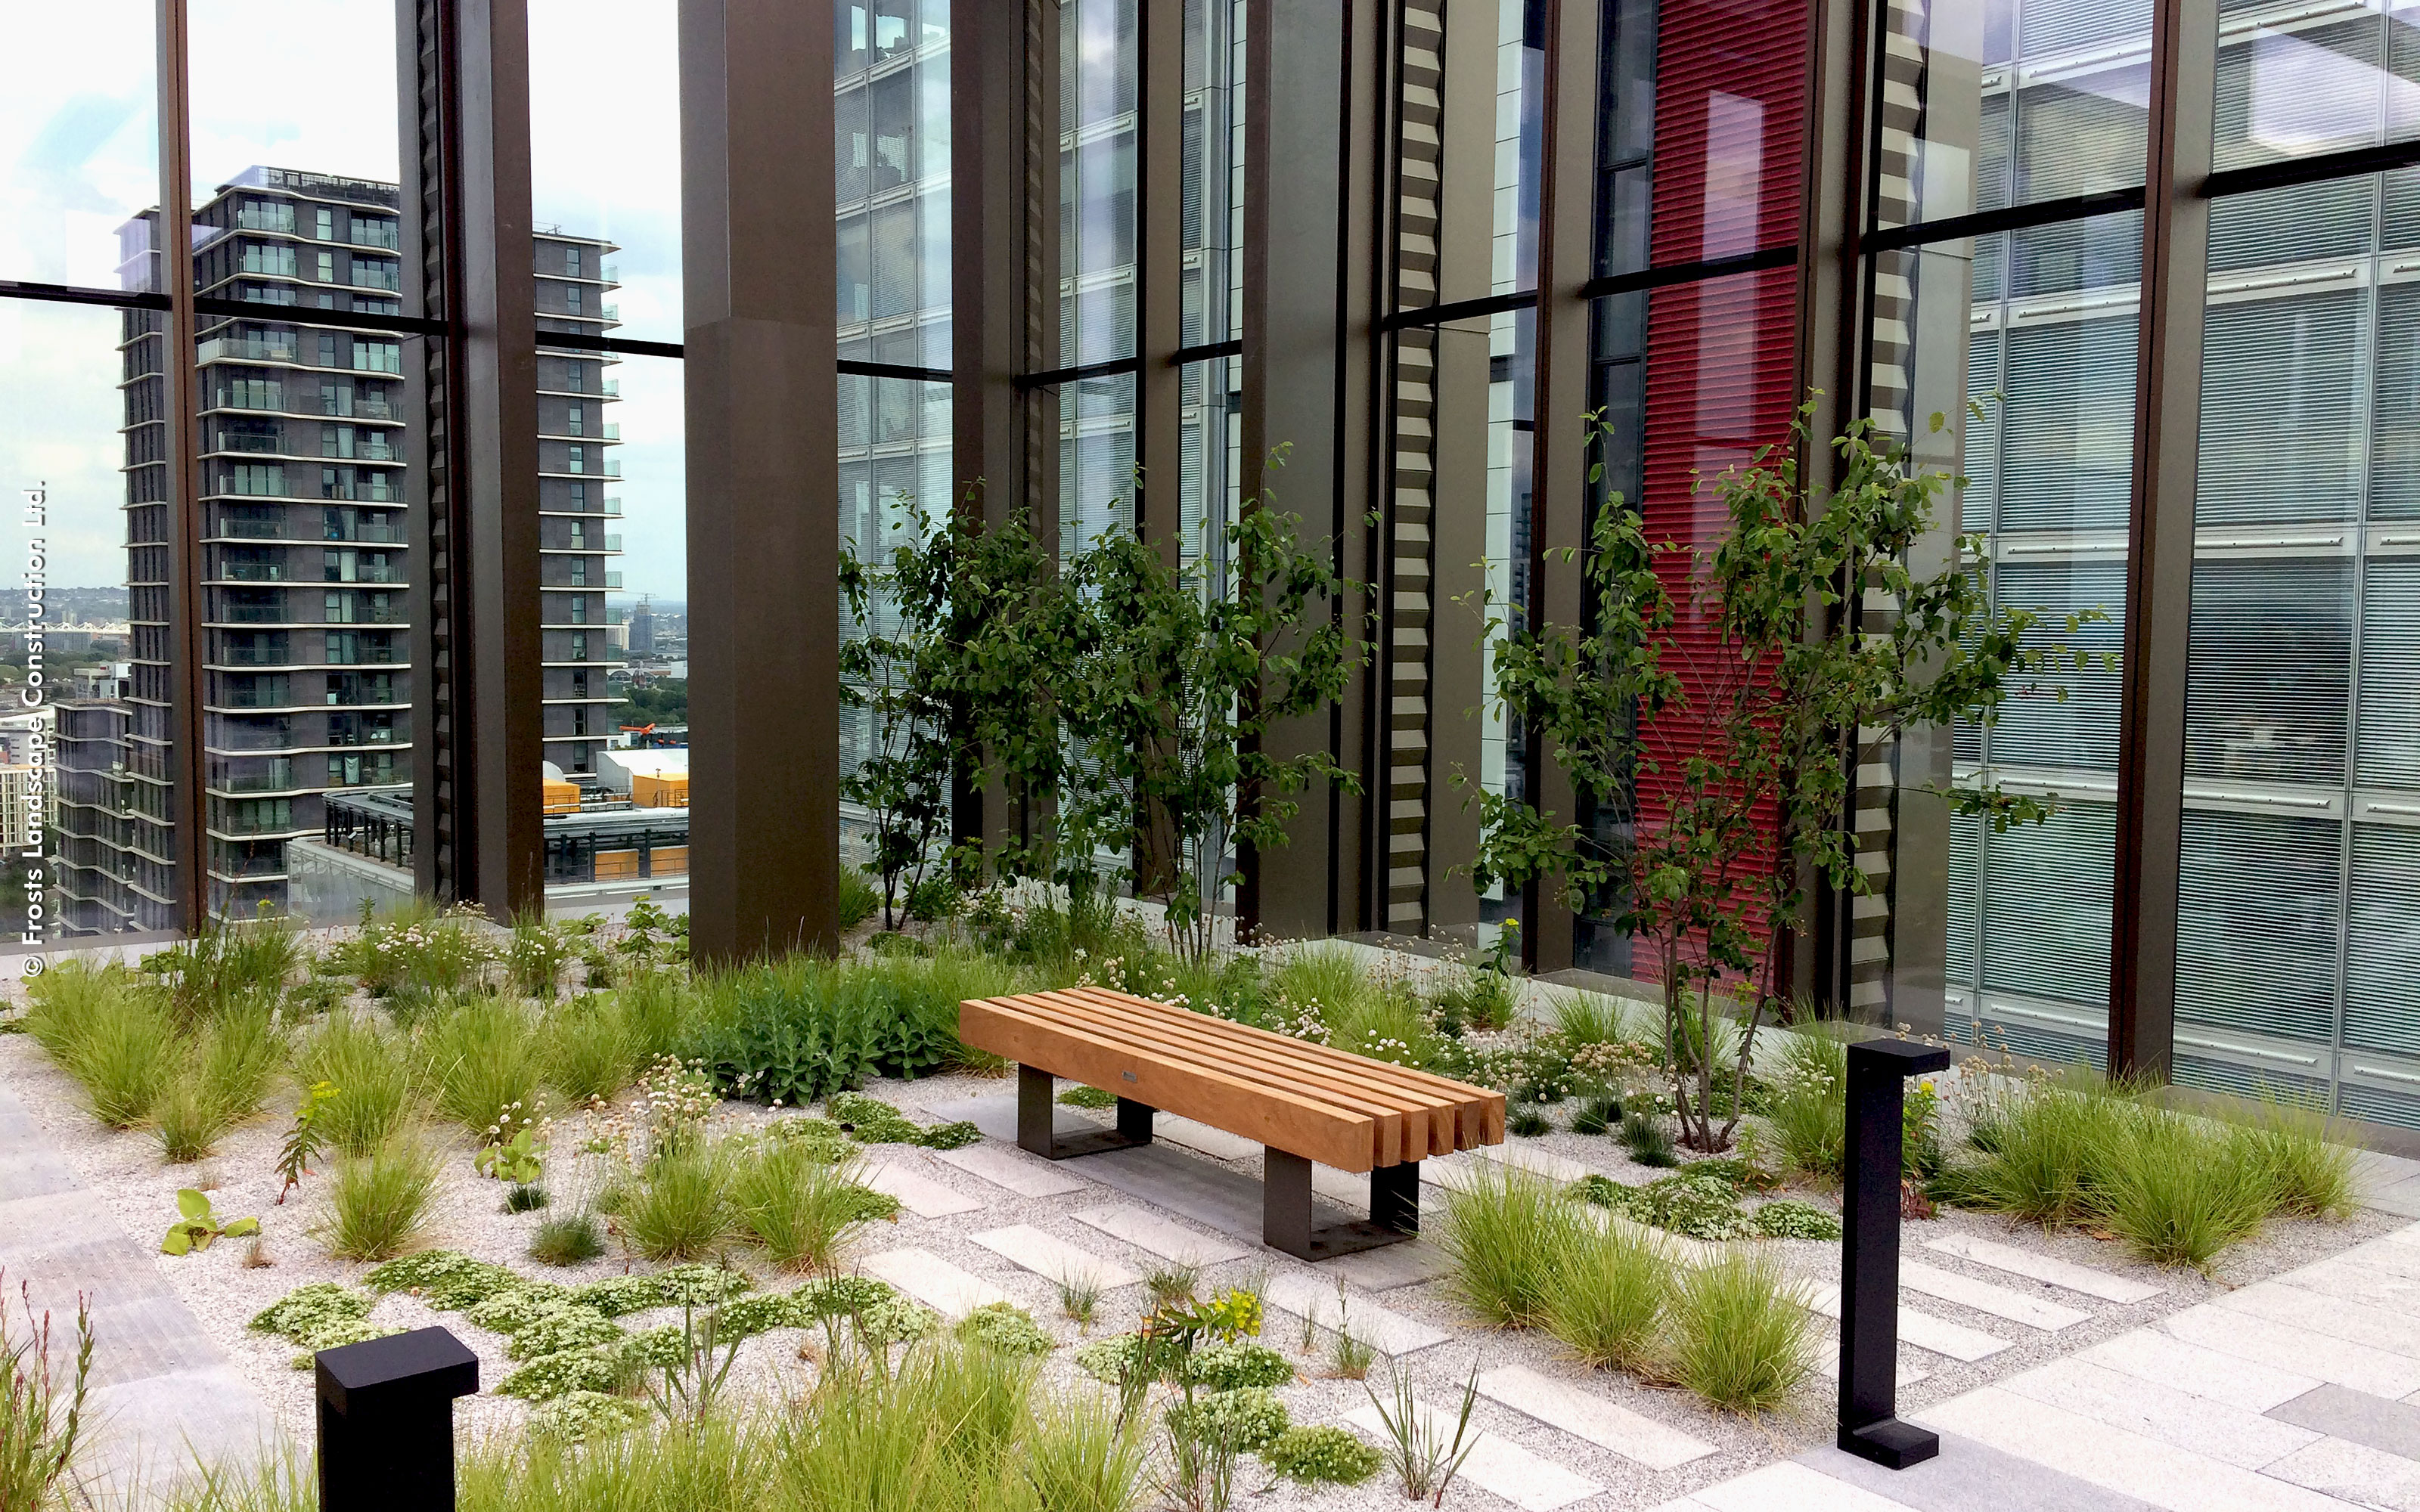 Roof terrace with a bench, ornamental grasses, shrubs, paving and gravel